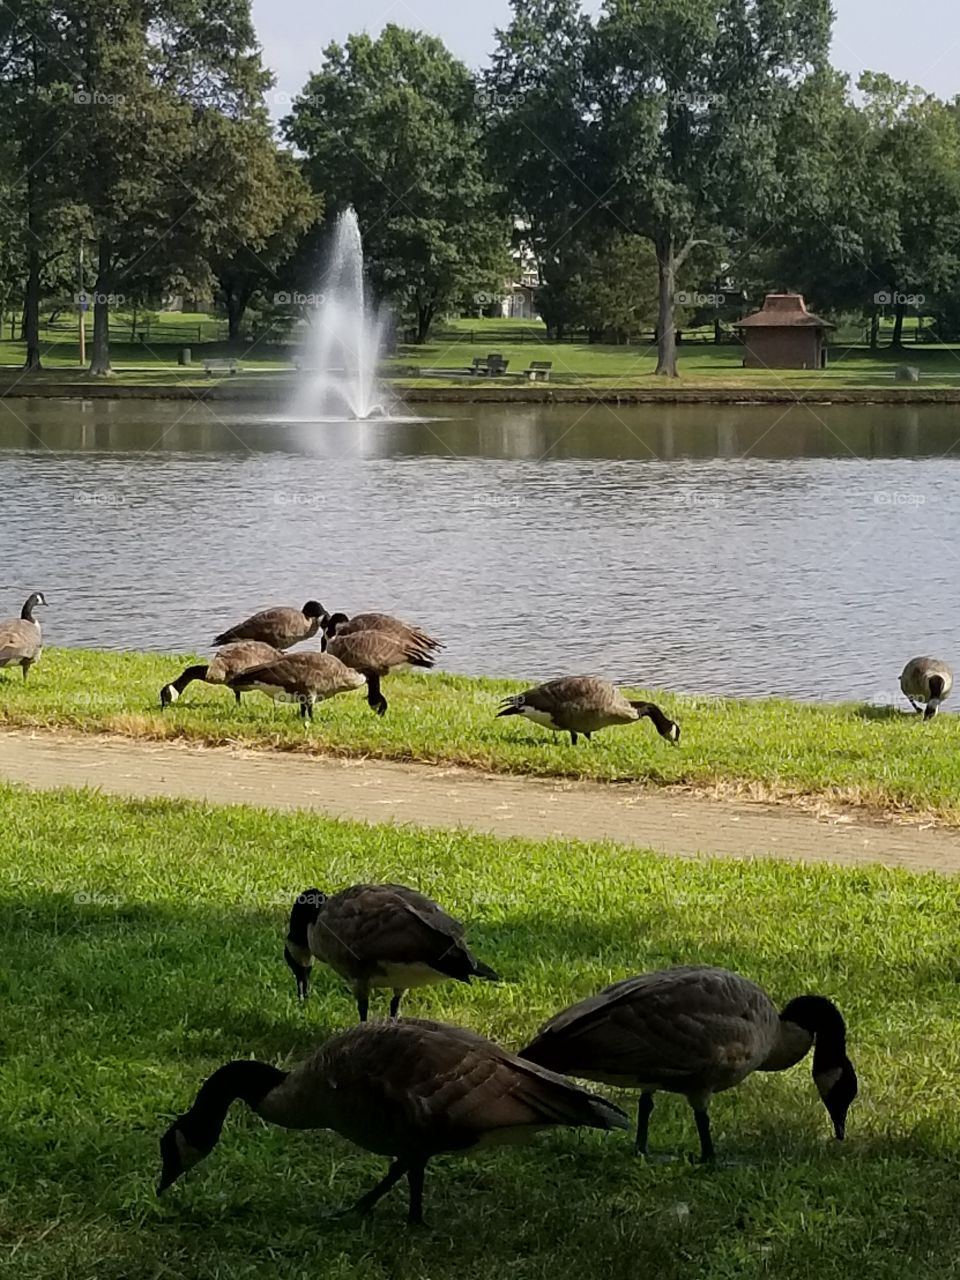 Geese at Allen pond park Maryland